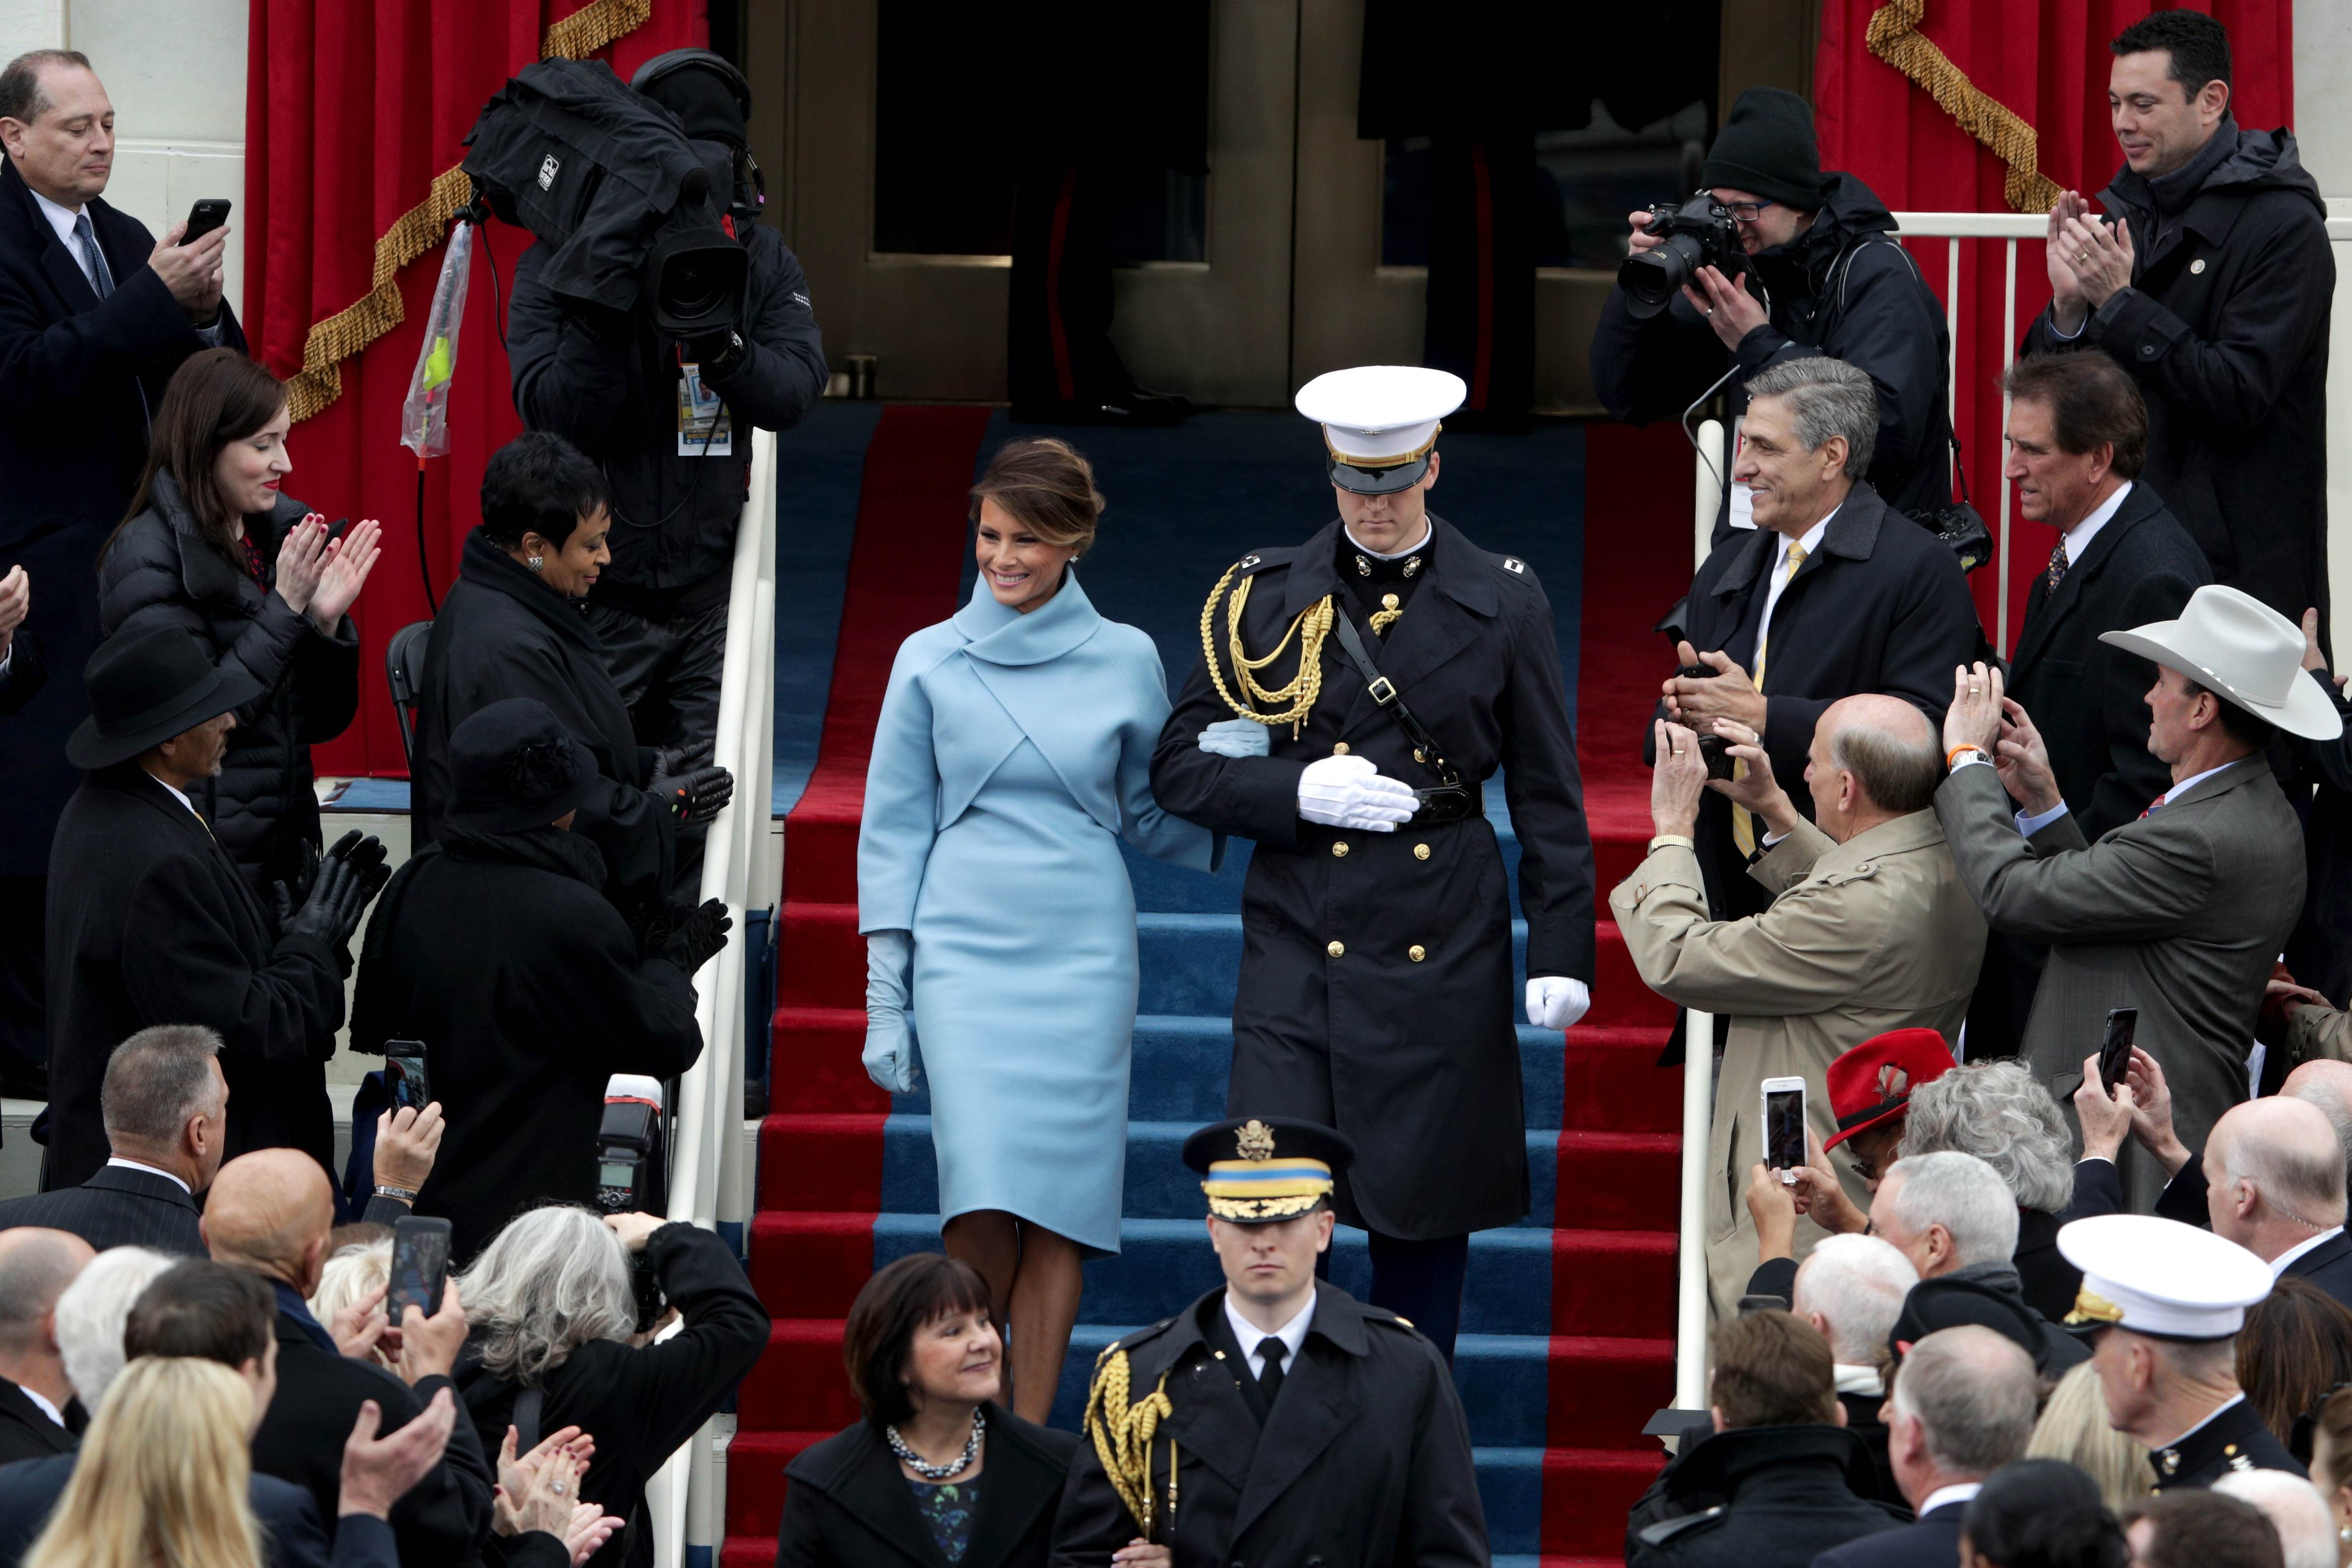 WASHINGTON, DC - JANUARY 20: Melania Trump arrives on the West Front of the U.S. Capitol on January 20, 2017 in Washington, DC. In today's inauguration ceremony Donald J. Trump becomes the 45th president of the United States.   Alex Wong/Getty Images/AFP == FOR NEWSPAPERS, INTERNET, TELCOS & TELEVISION USE ONLY ==